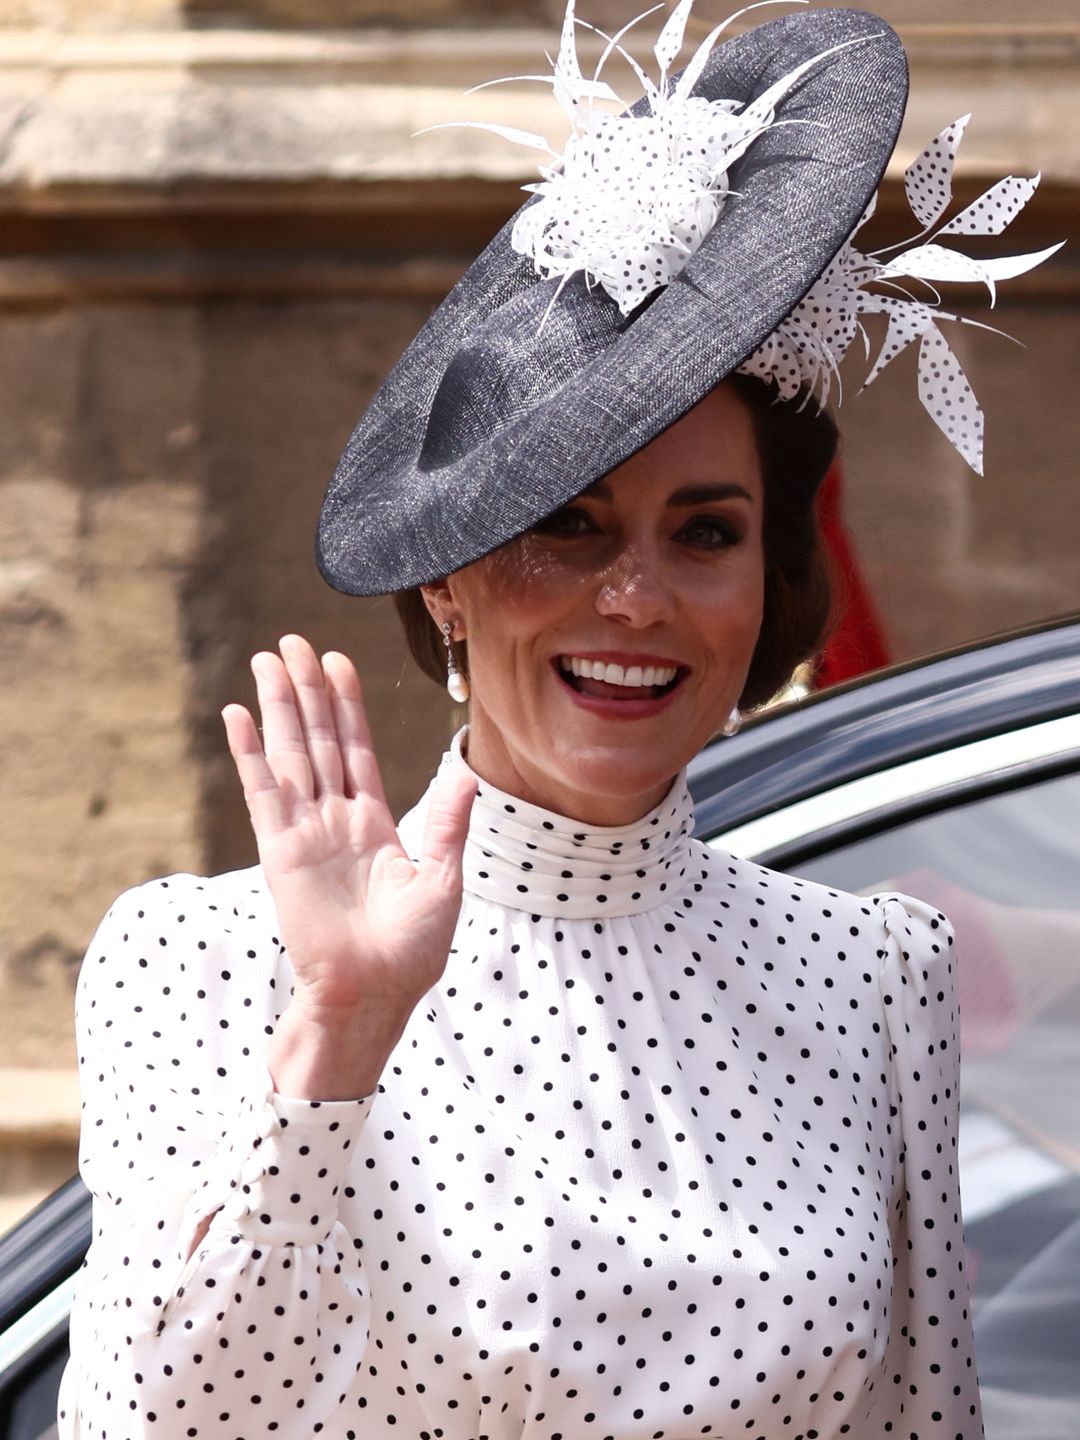 The Princess of Wales wearing a black and white polka dot dress and hat waving as she arrived at St George's Chapel to attend the Order Of The Garter Service 